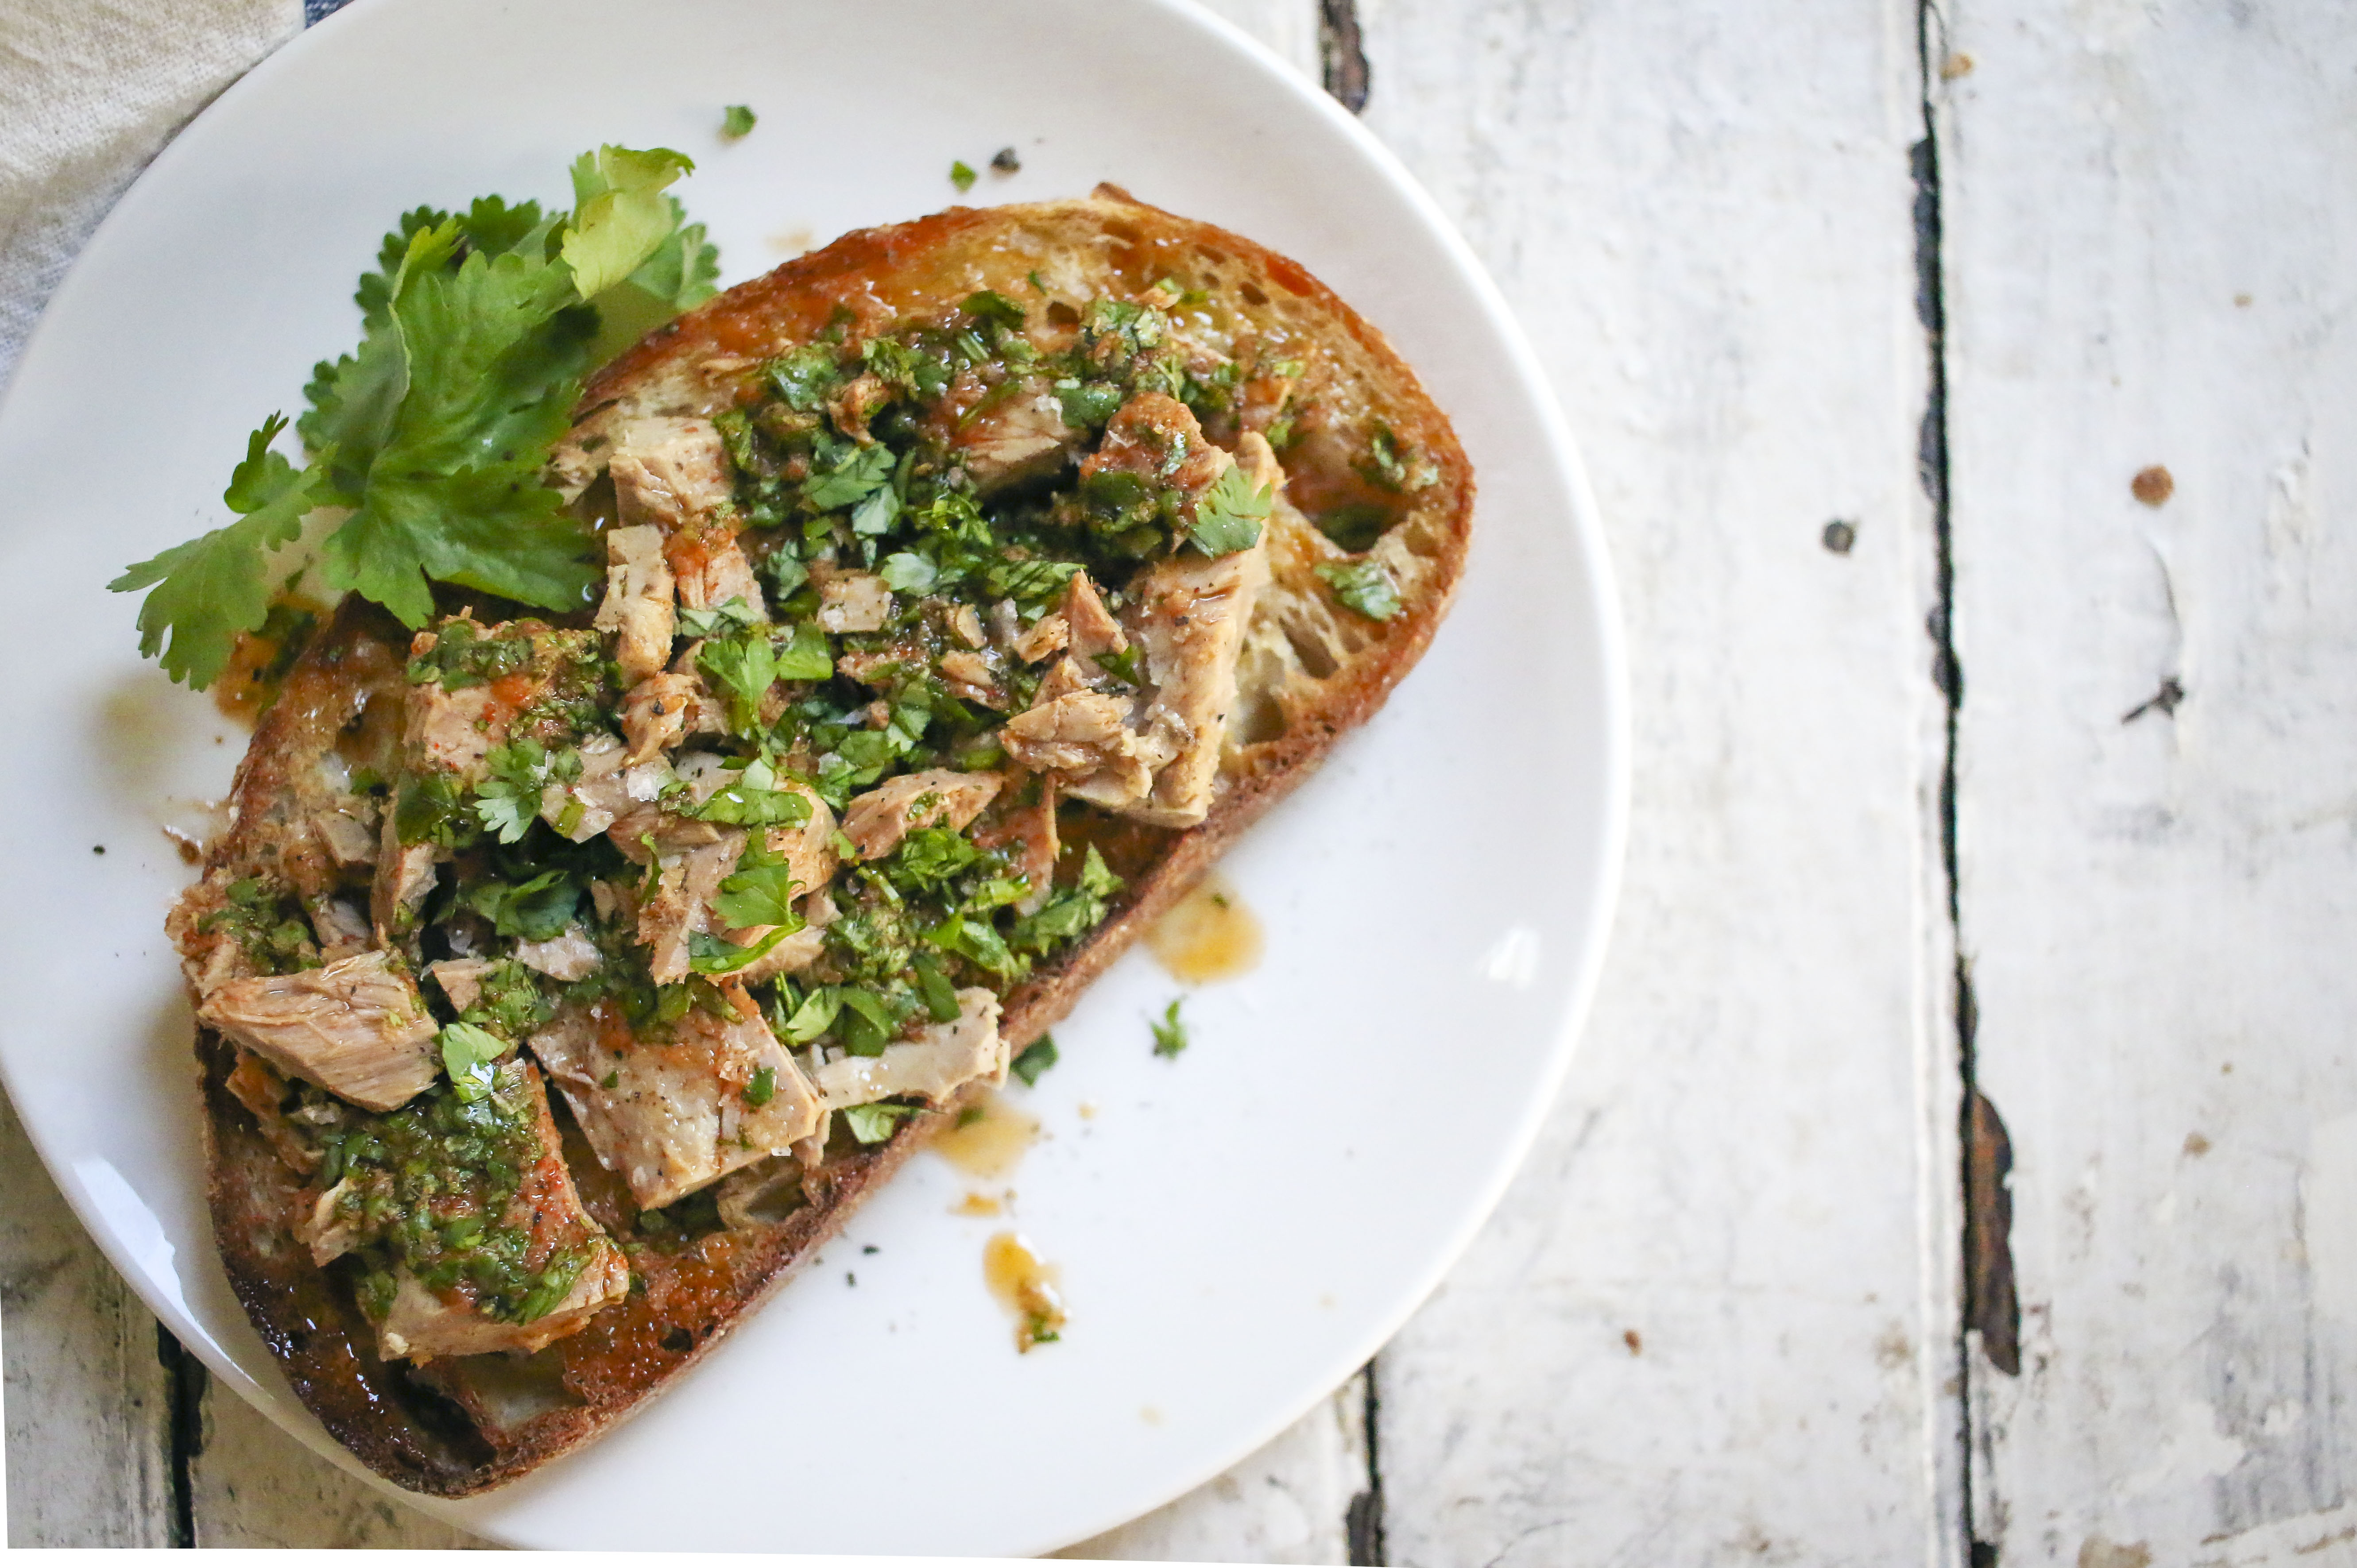 Tuna Toast with Chermoula | delicious way to elevate canned tuna | I Will Not Eat Oysters